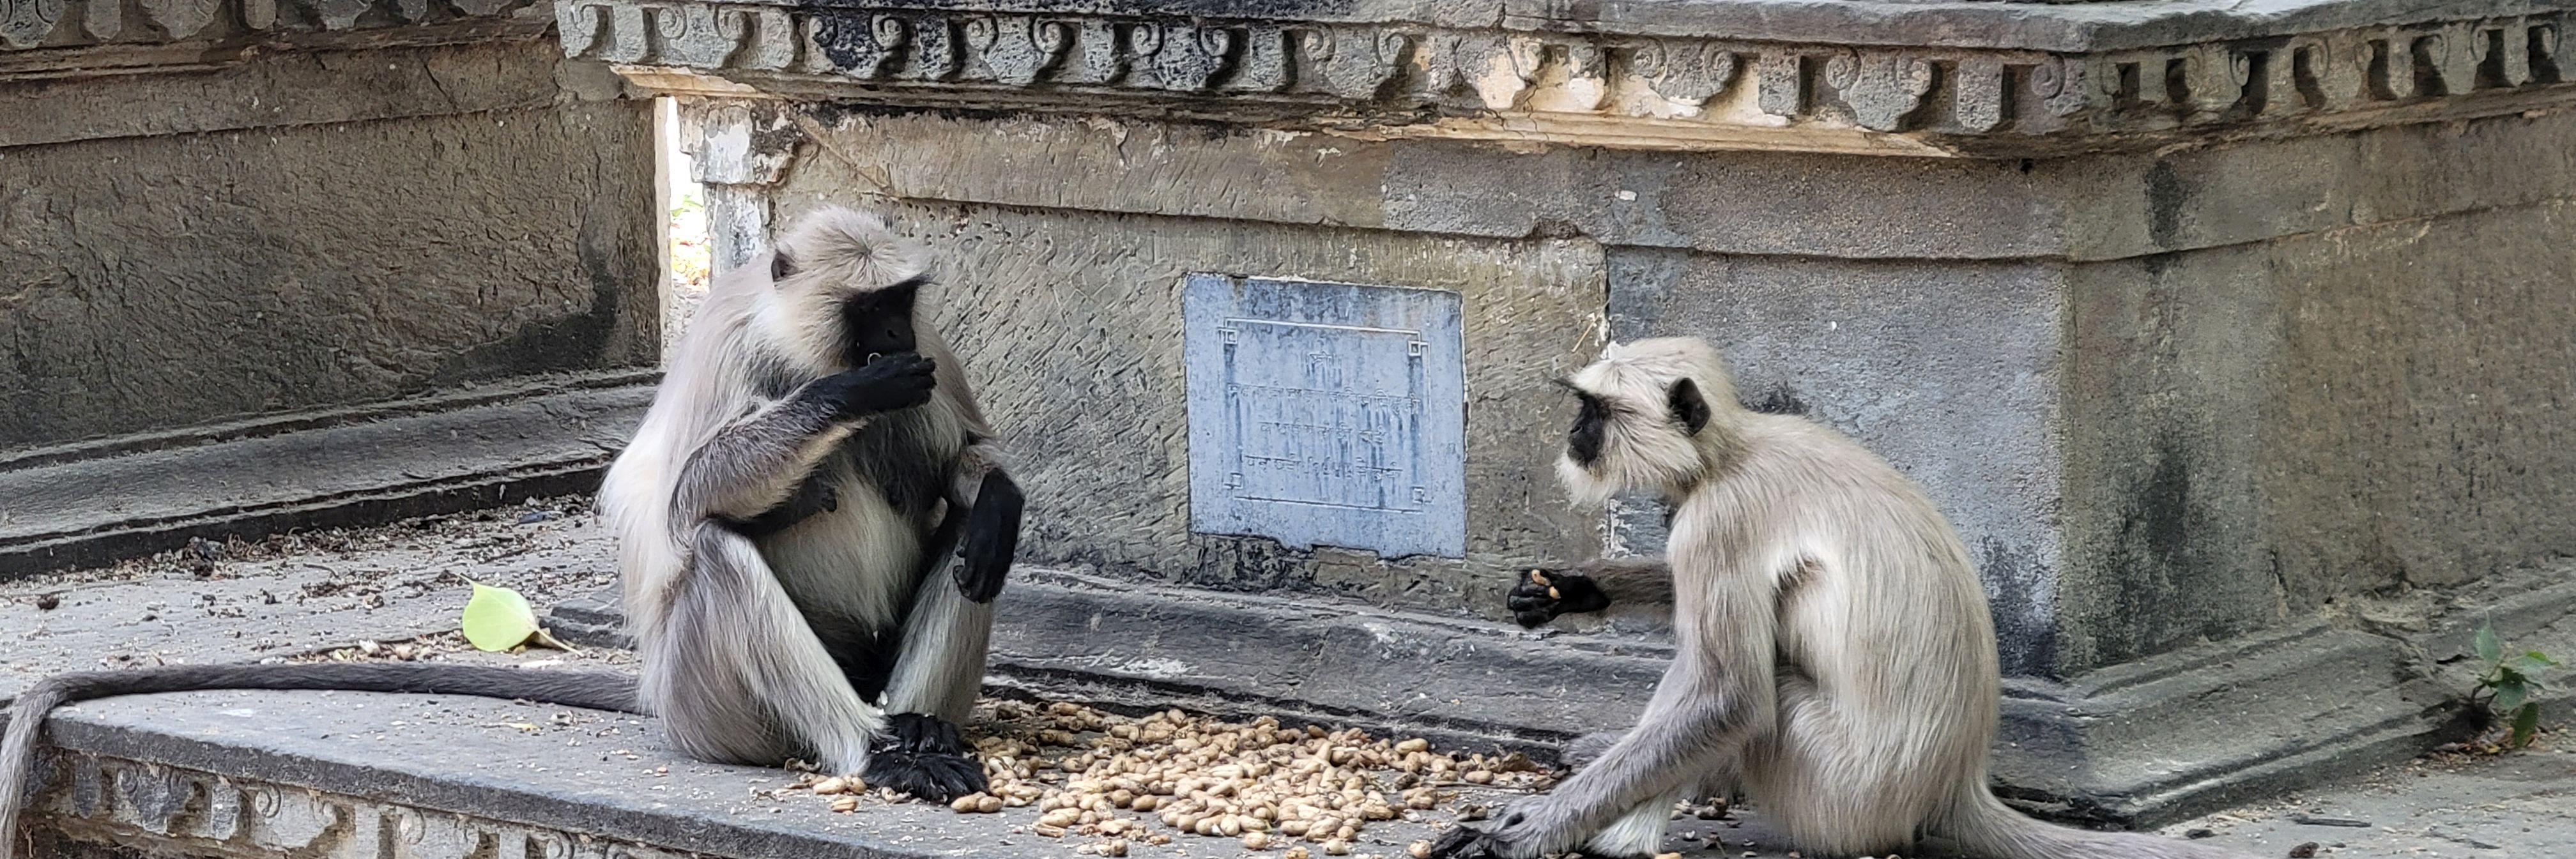 Langur discussion at a cenotaph in Udaipur, India